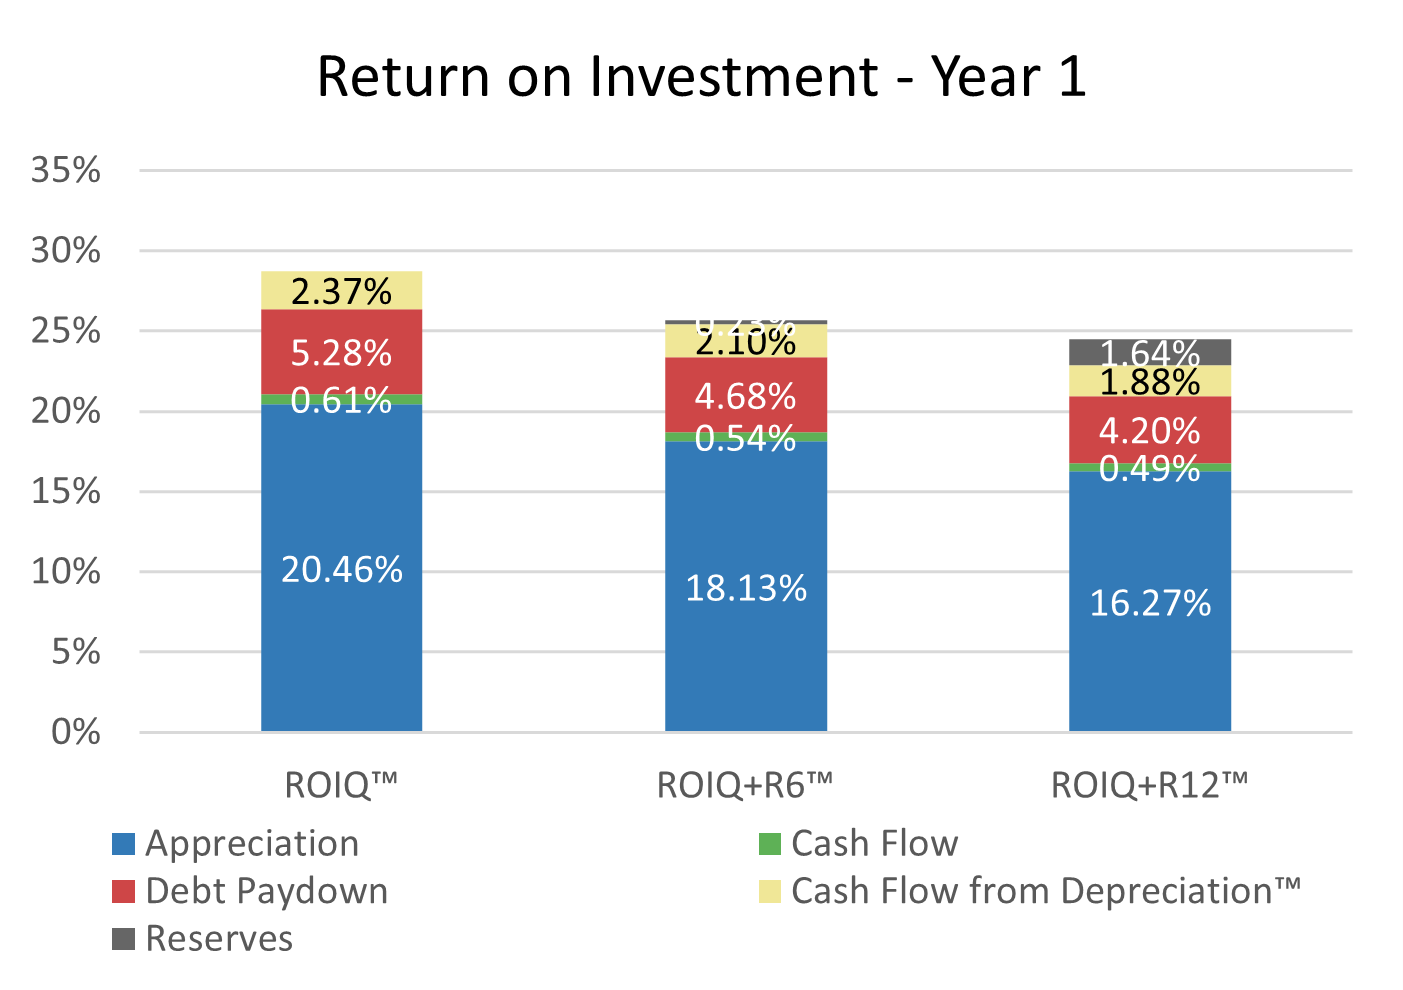 3 - Return on Investment - Year 1